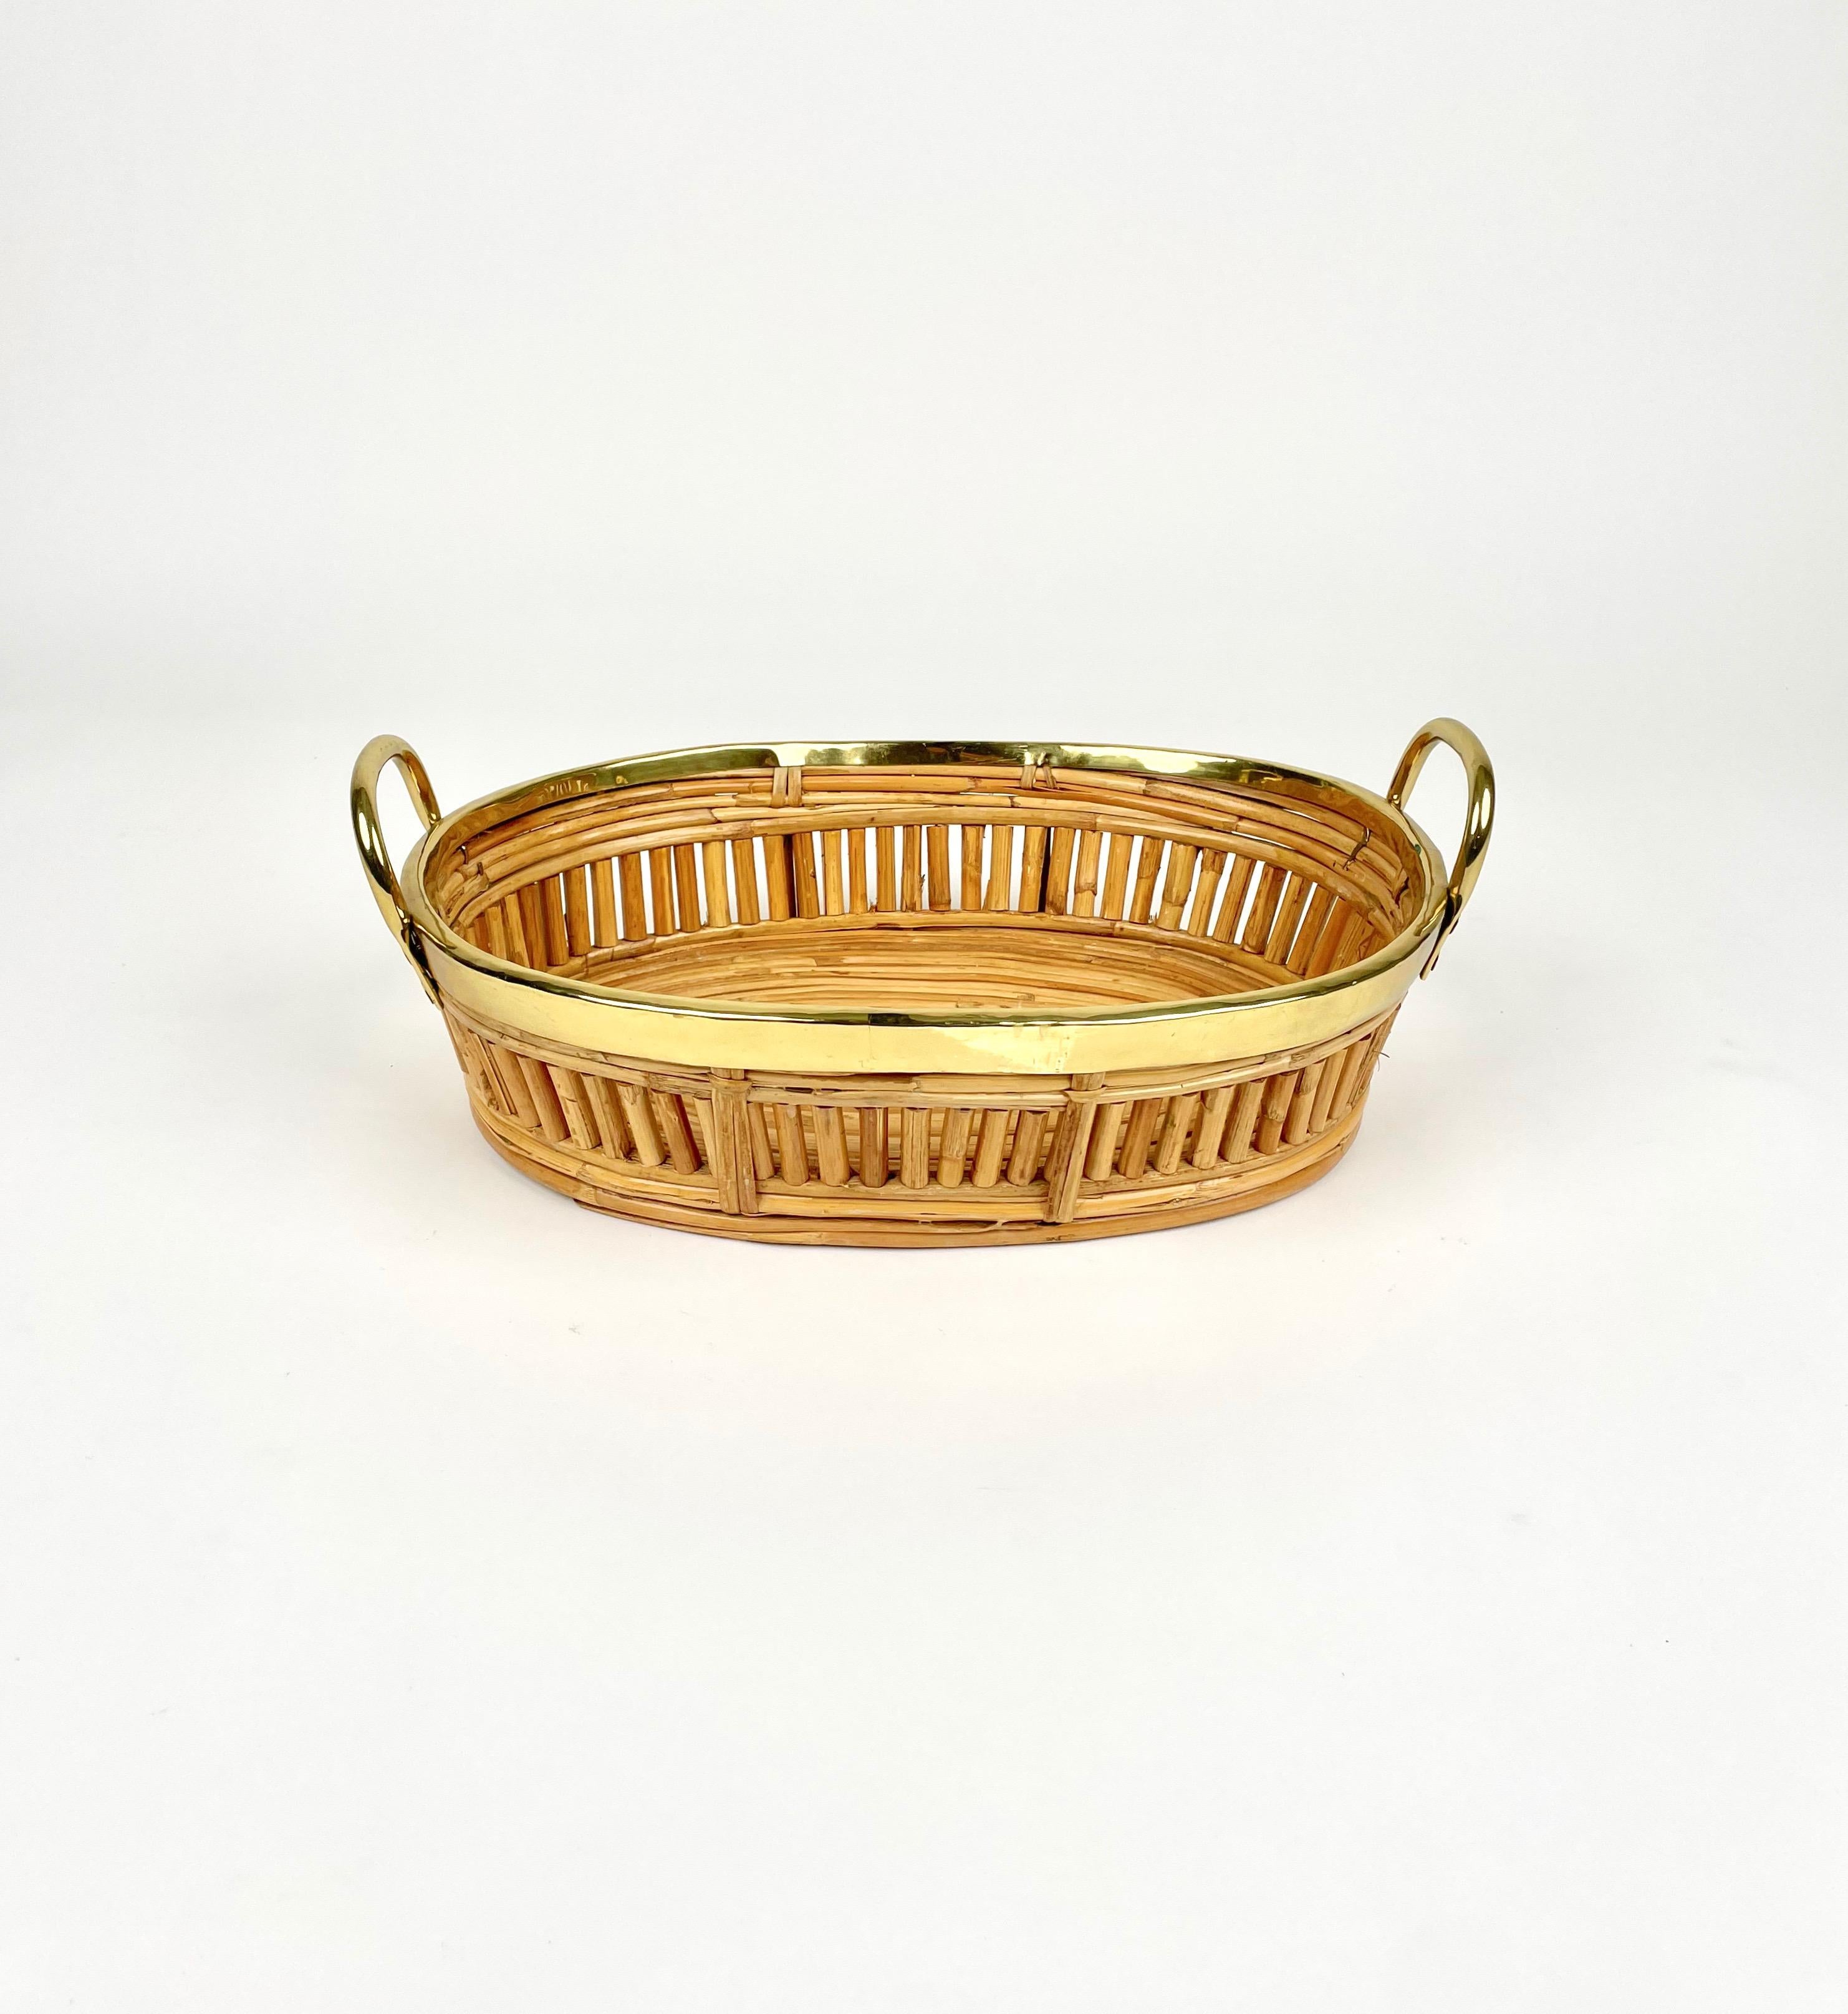 Midcentury Centerpiece Basket Rattan and Brass, Italy 1970s For Sale 4